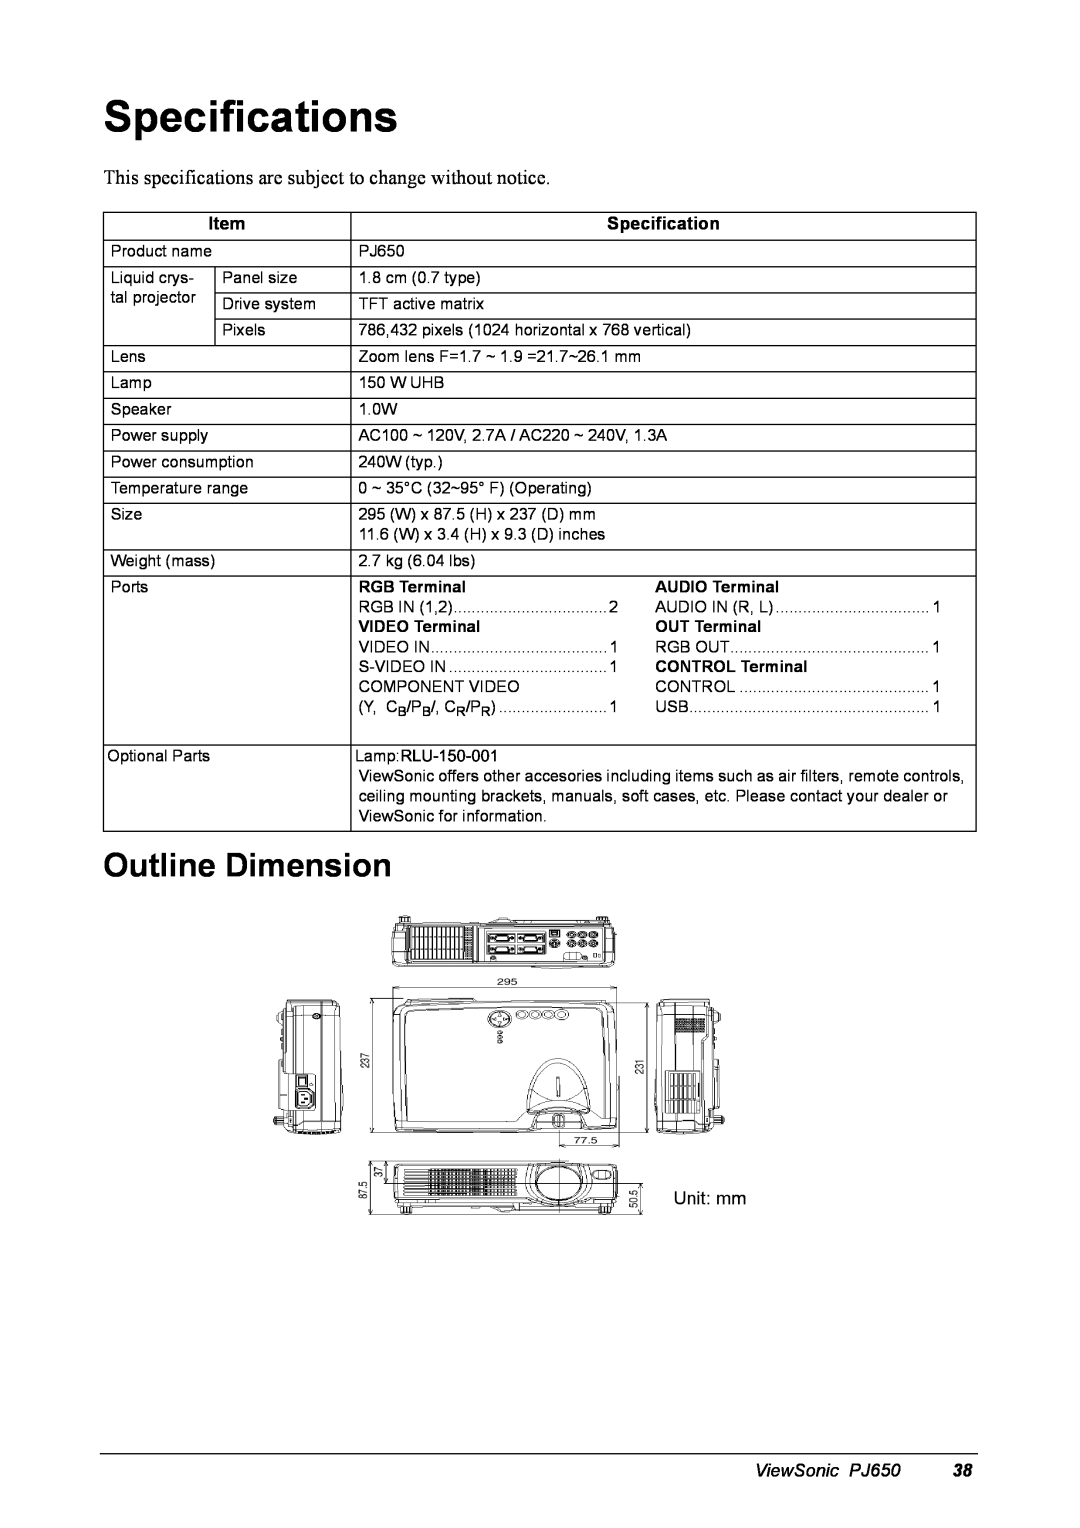 ViewSonic manual Specifications, Outline Dimension, ViewSonic PJ650 